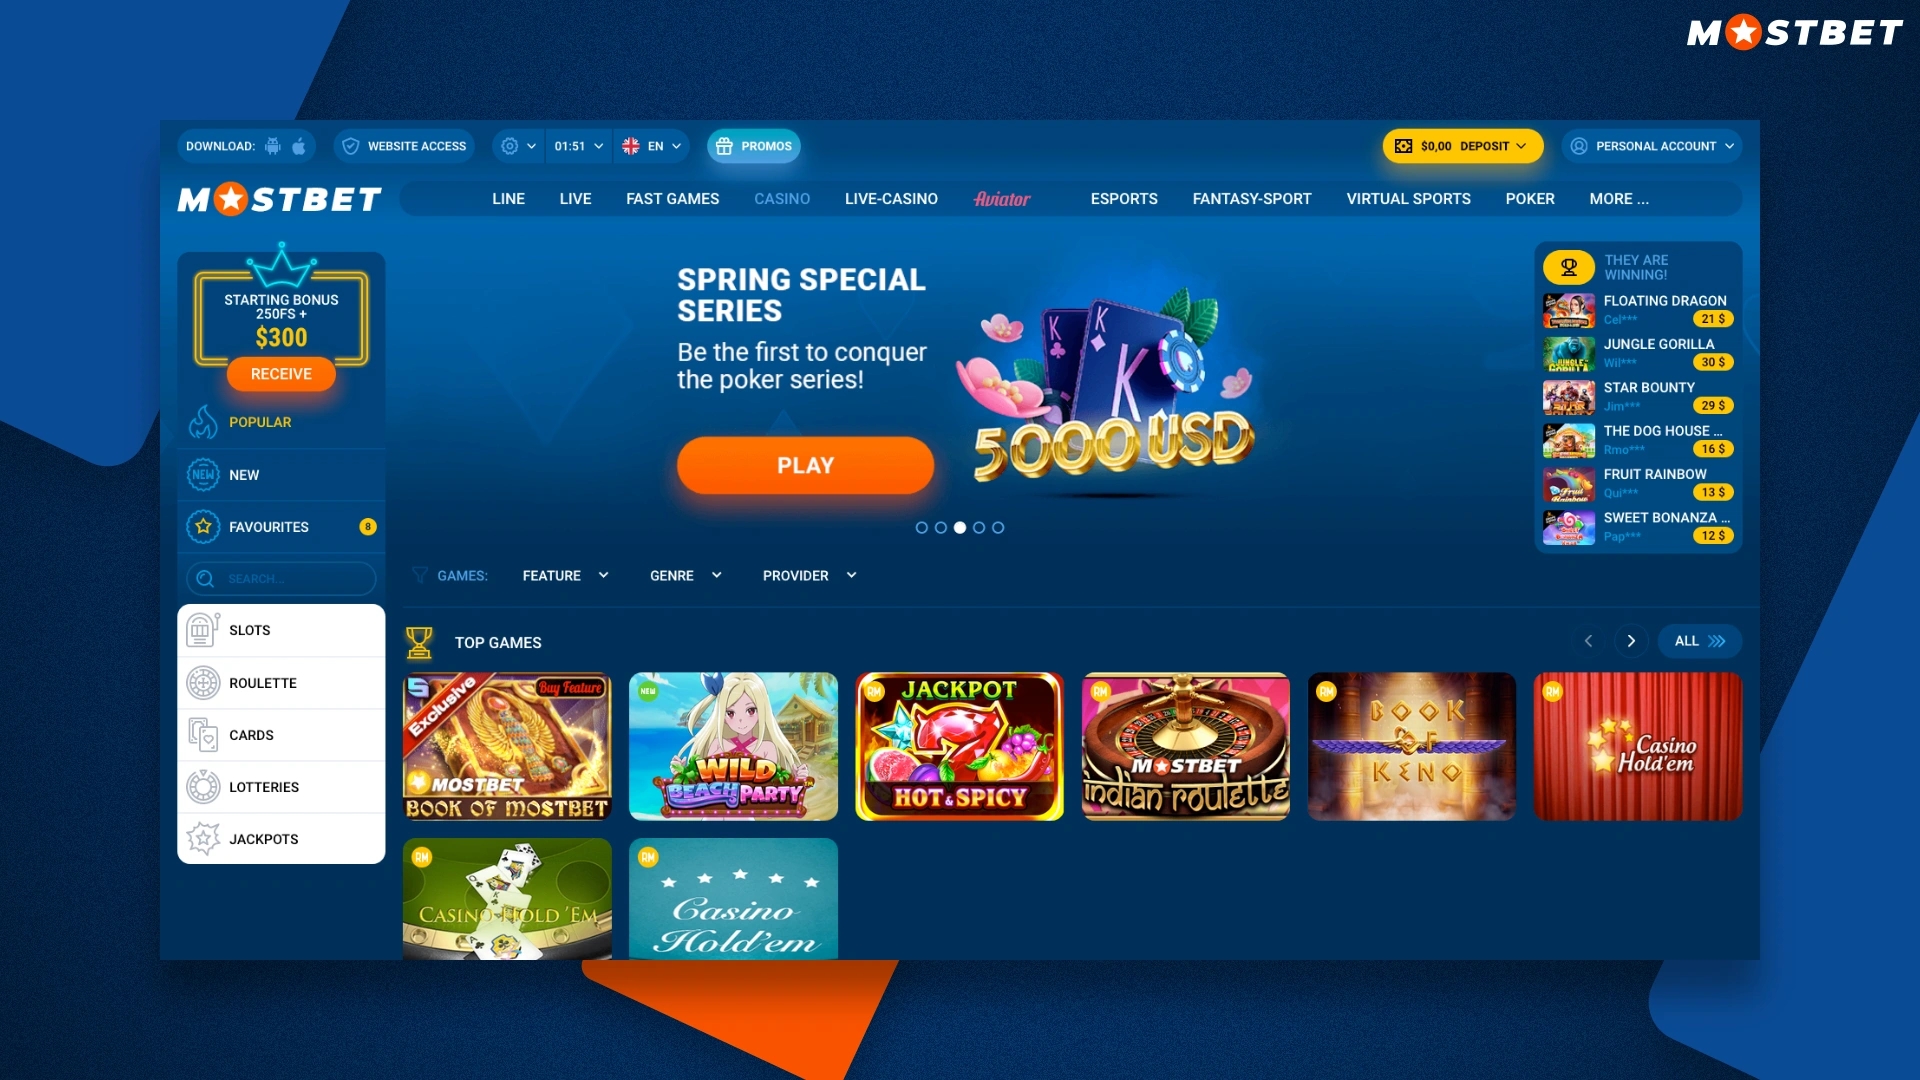 Get cashback at mostbet casino just by playing